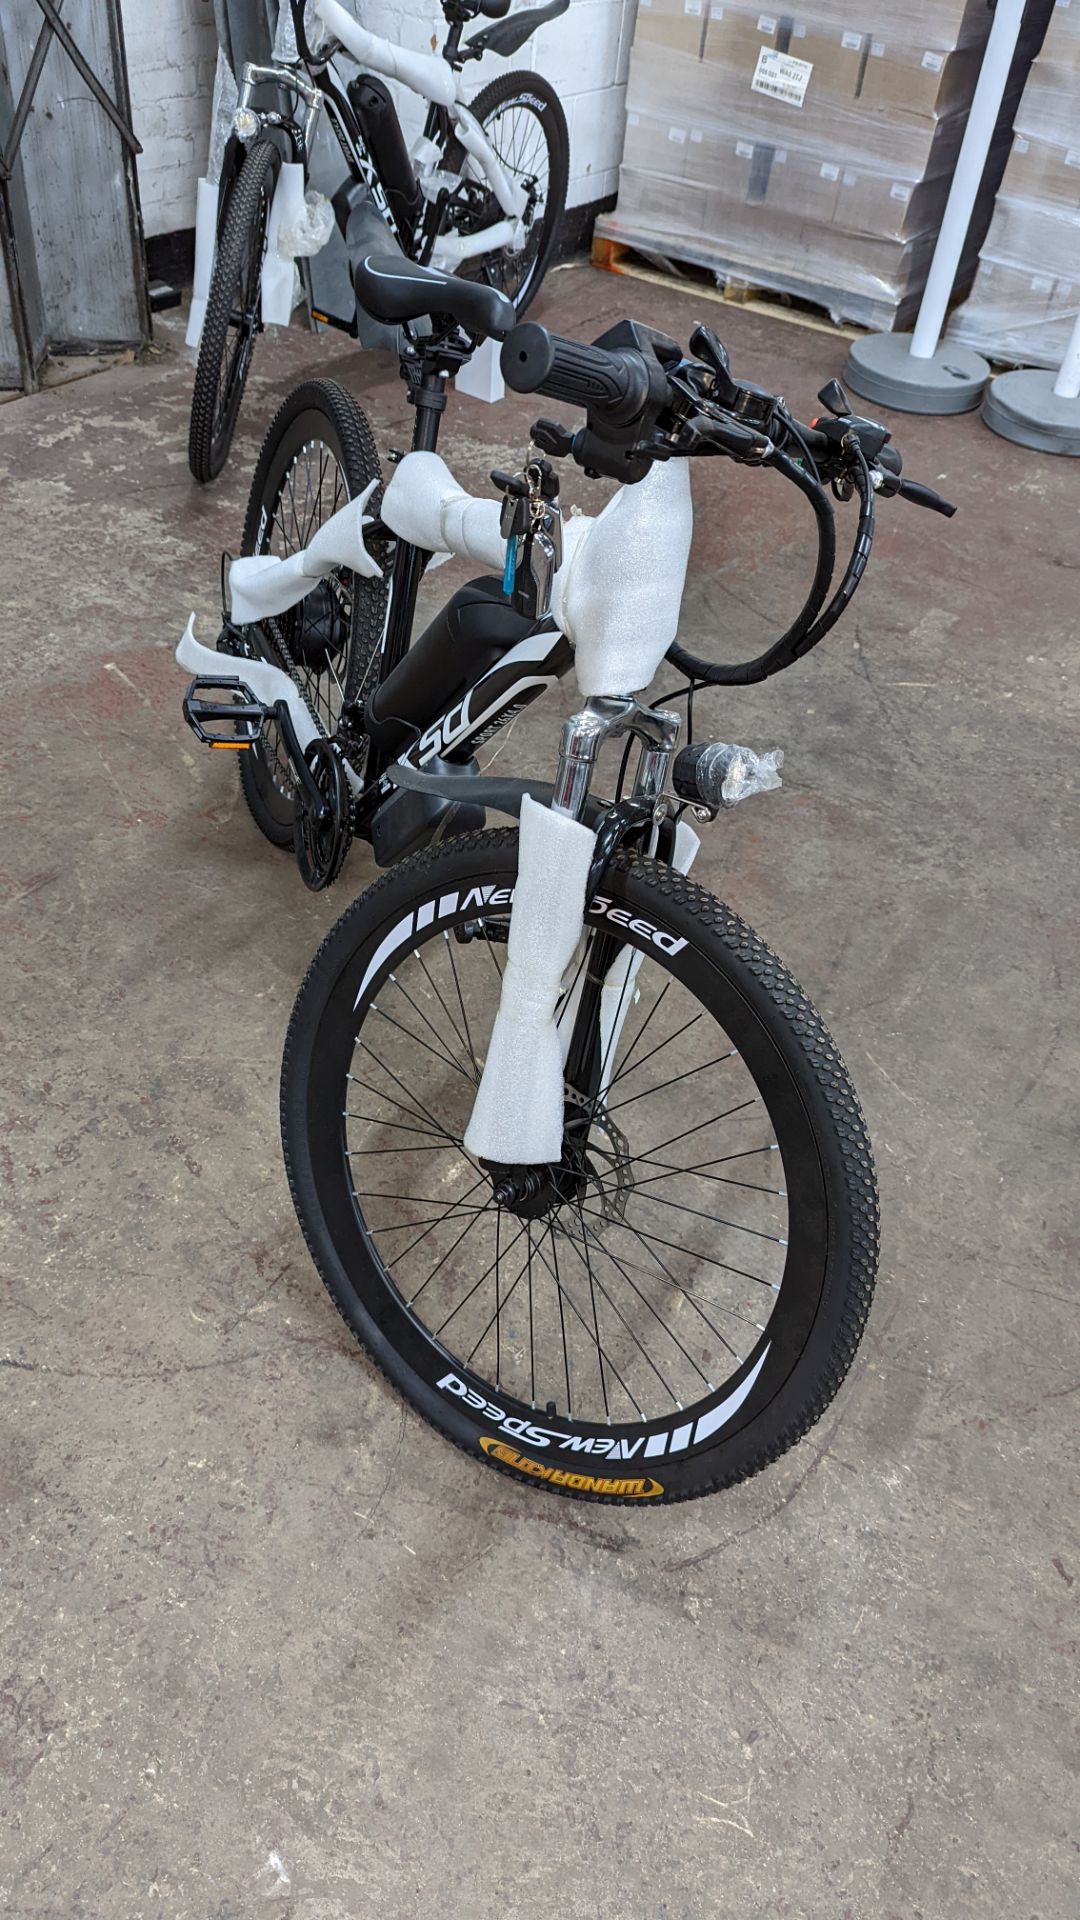 XSD FTX Sport MTB 7.5 Racing electric bike with Shimano Tourney TZ gears. Includes 36v 12AH battery, - Image 10 of 22